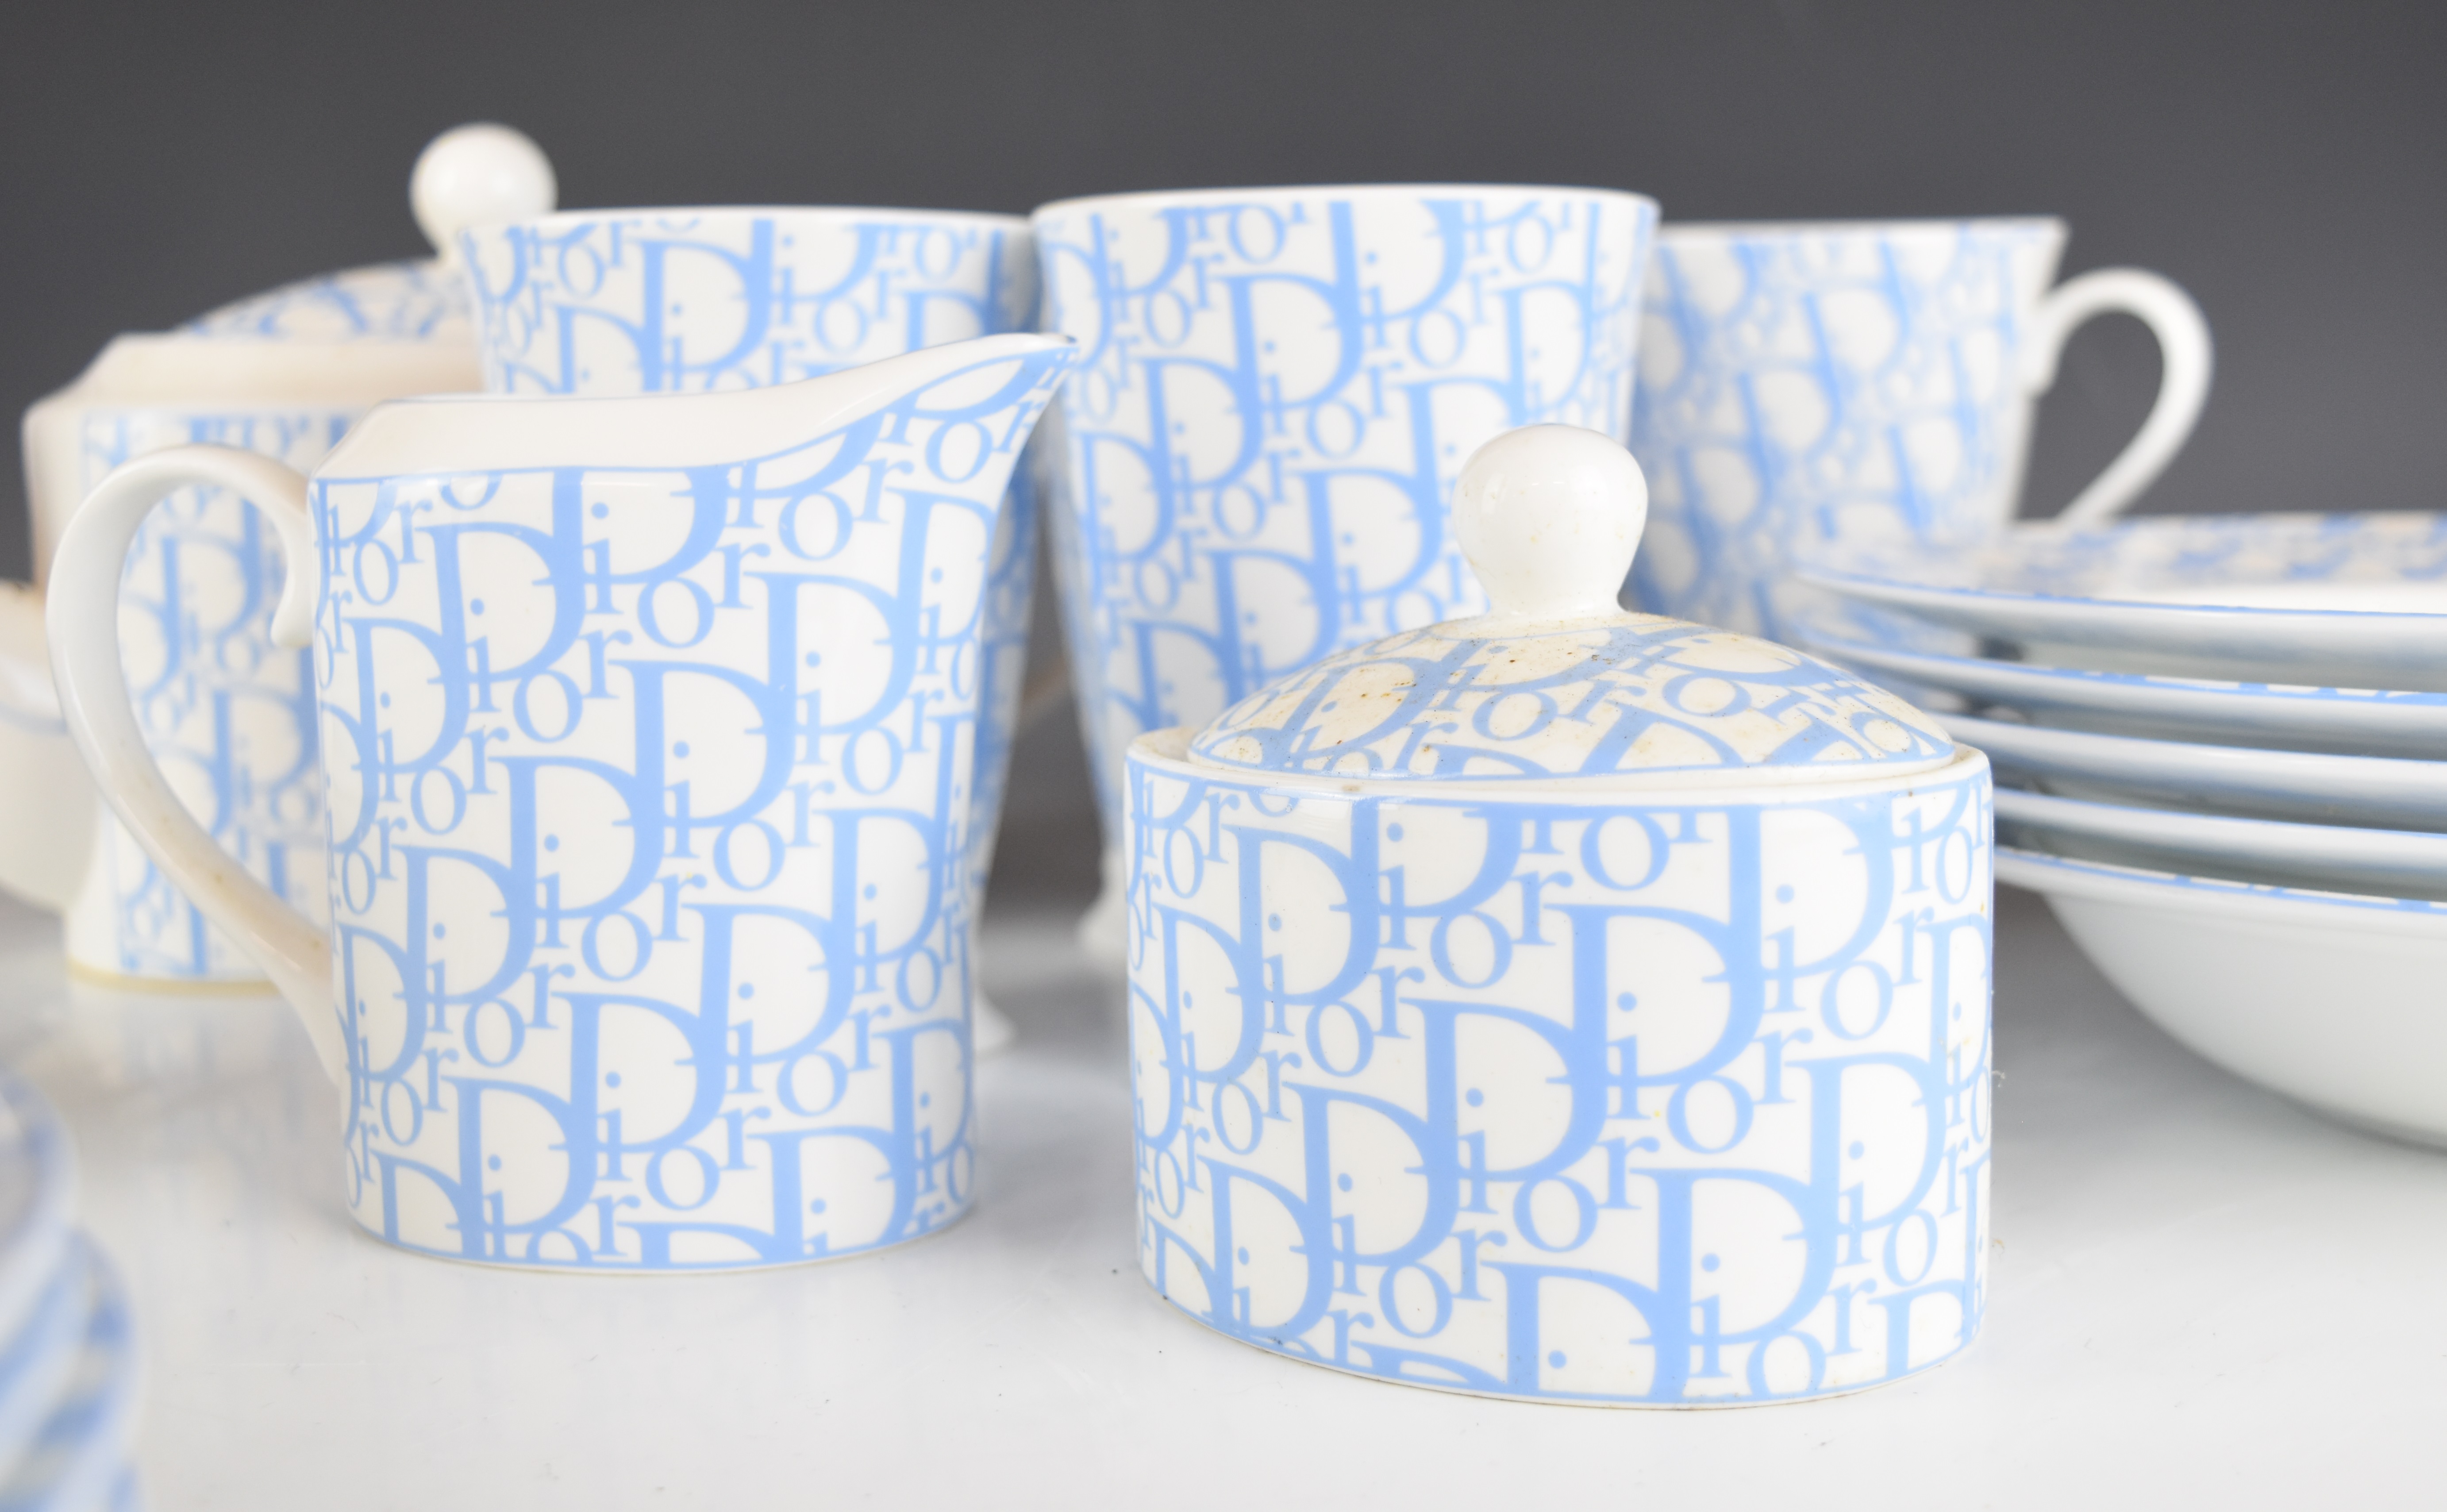 Dior designer porcelain dinner and teaware with Dior motif decoration, approximately 27 pieces, - Image 9 of 14